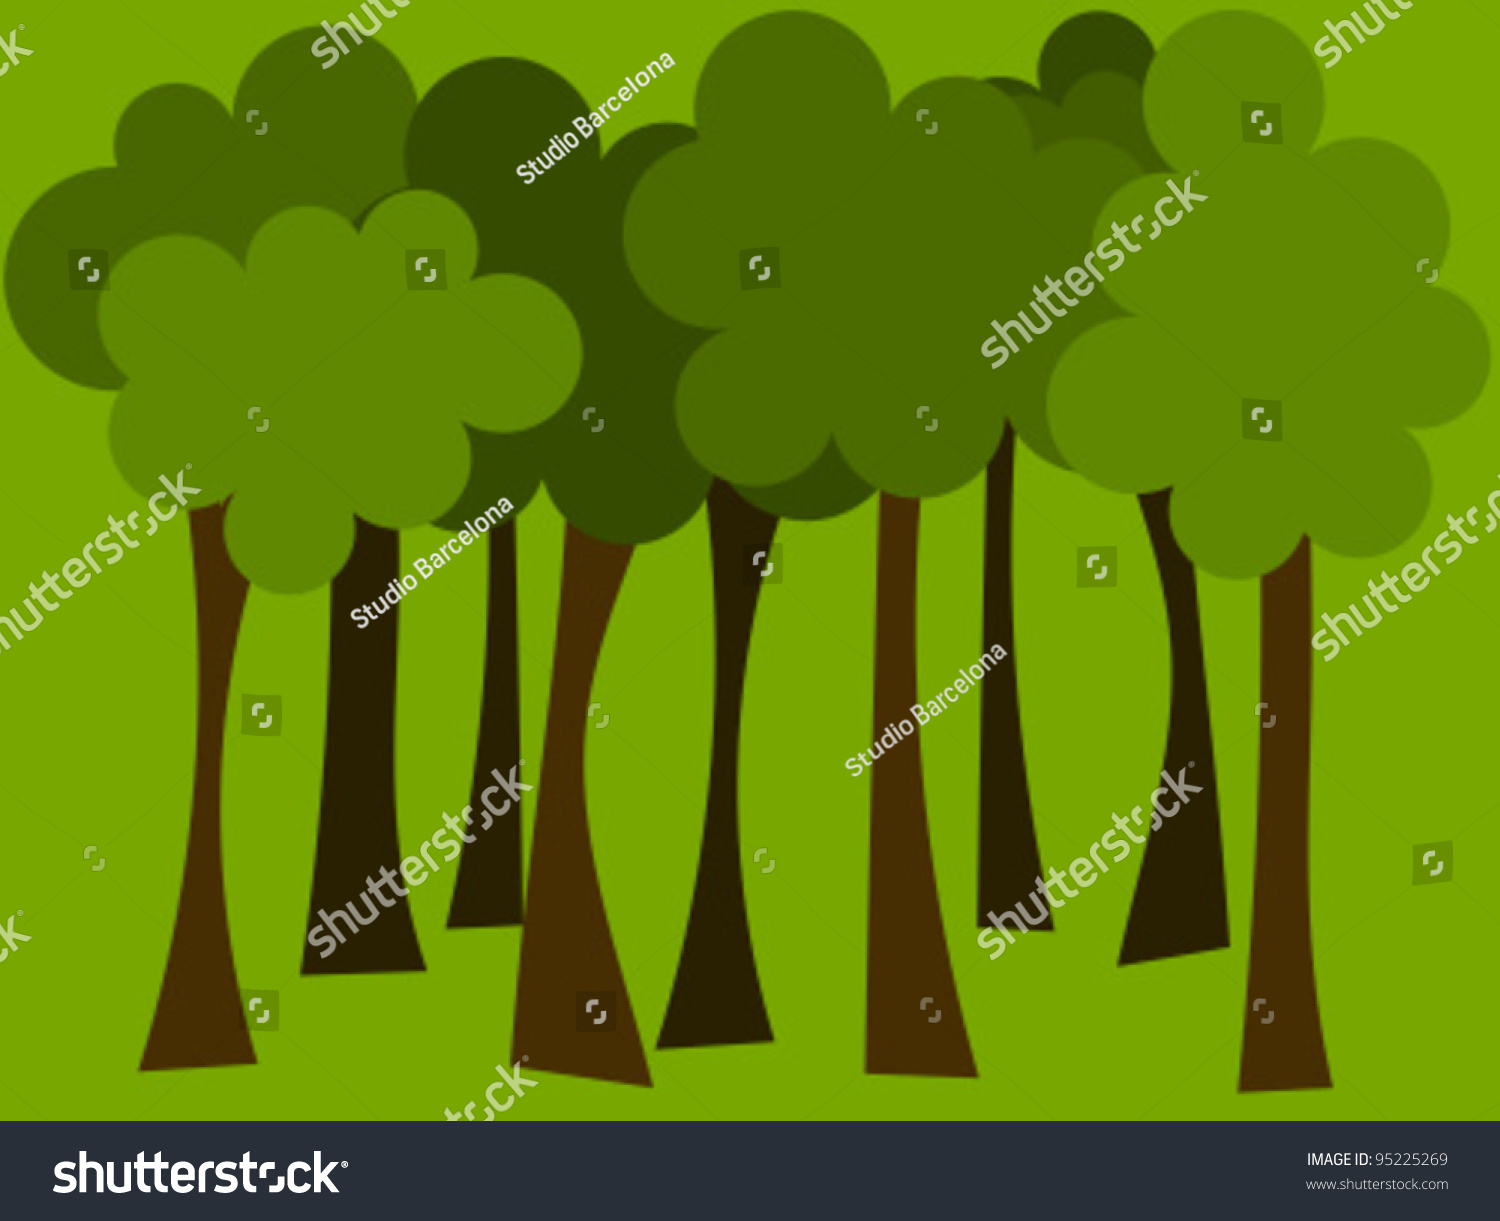 Symbolic Forest - Vector Background - 95225269 : Shutterstock